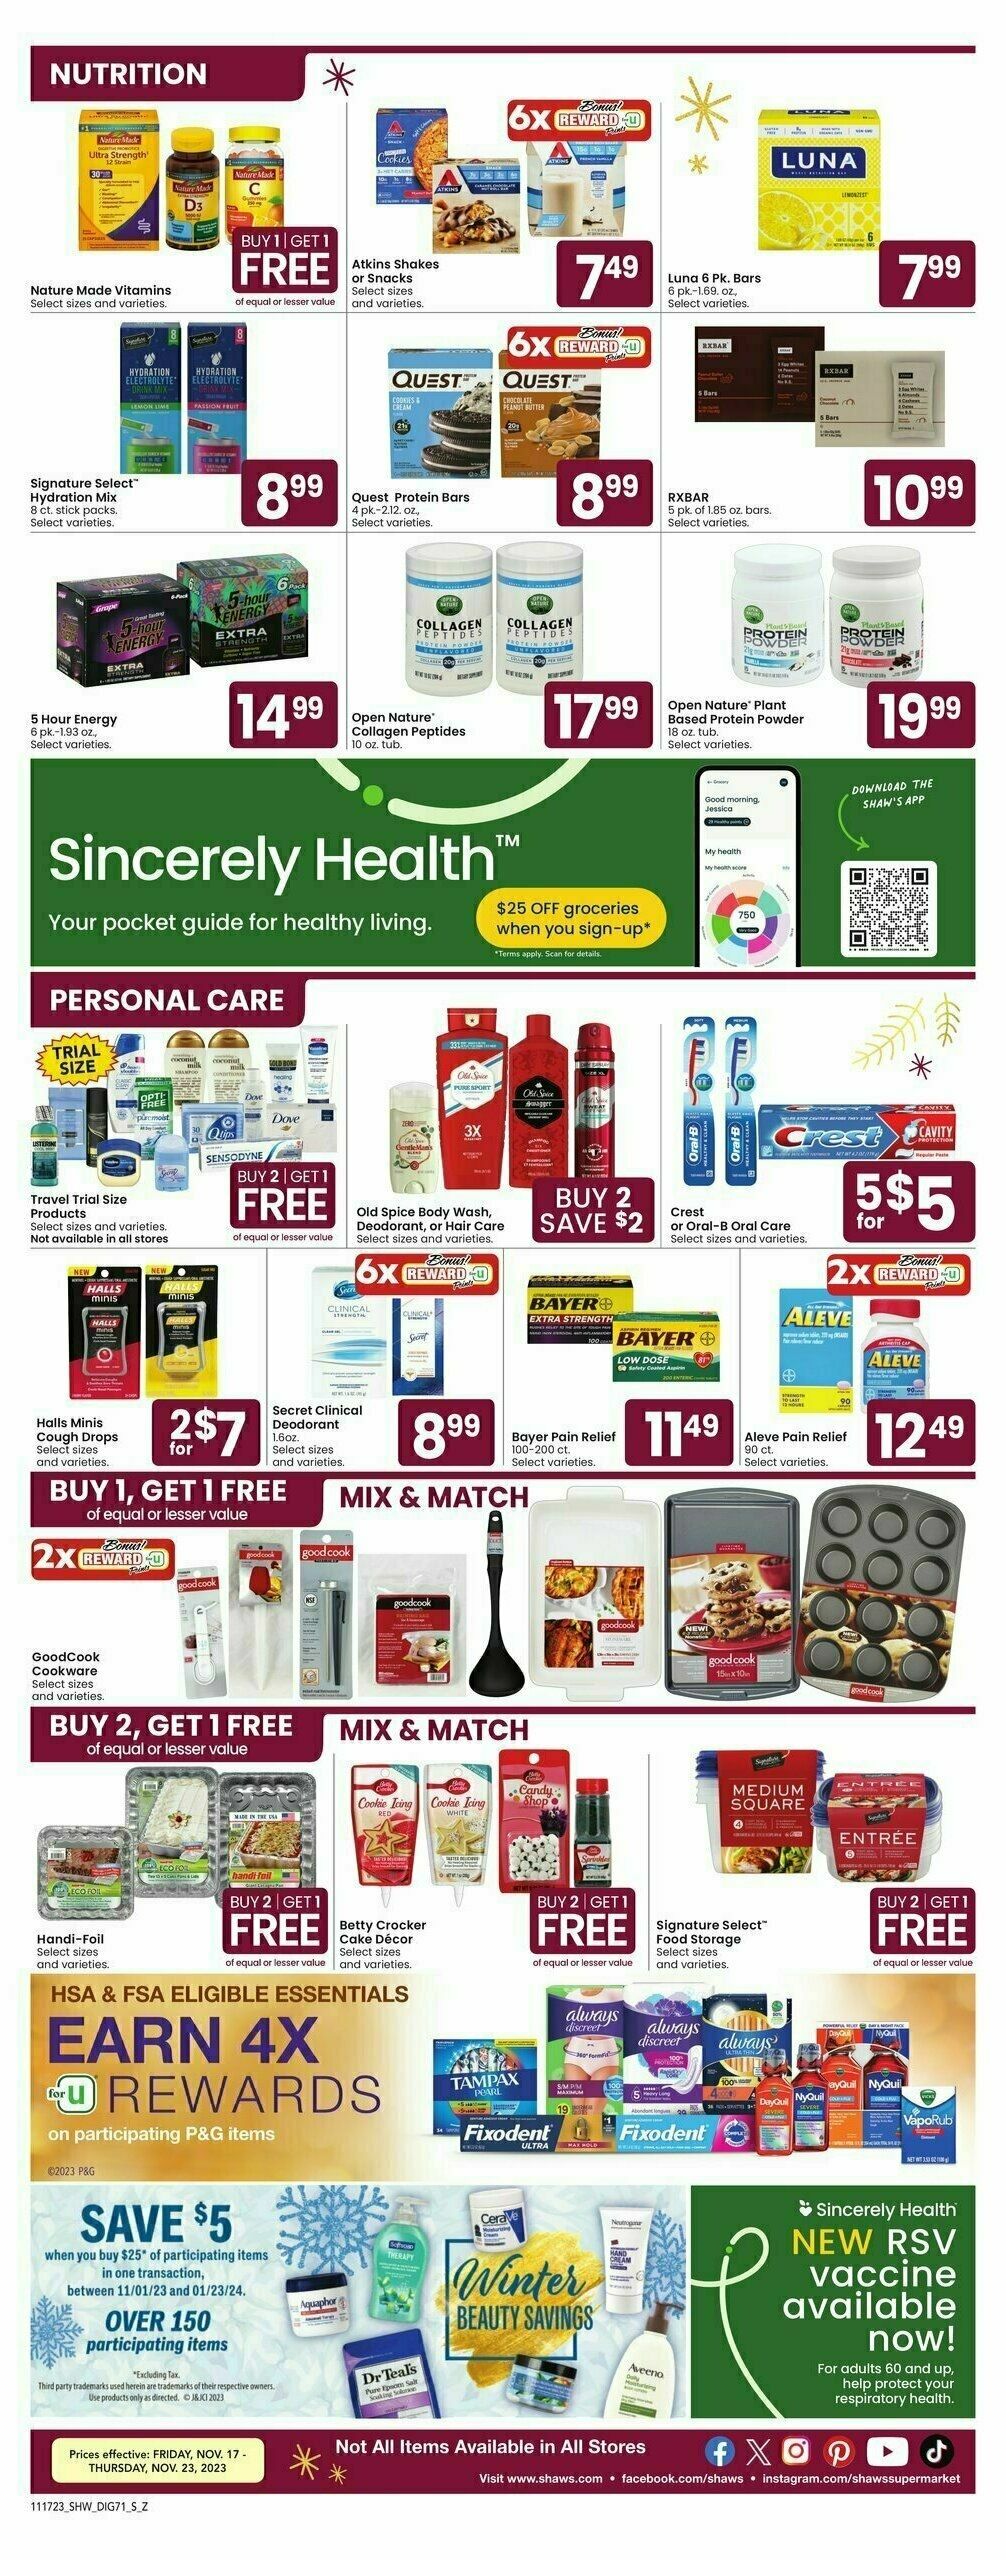 Shaw's Health, Home & Beauty Weekly Ad from November 17